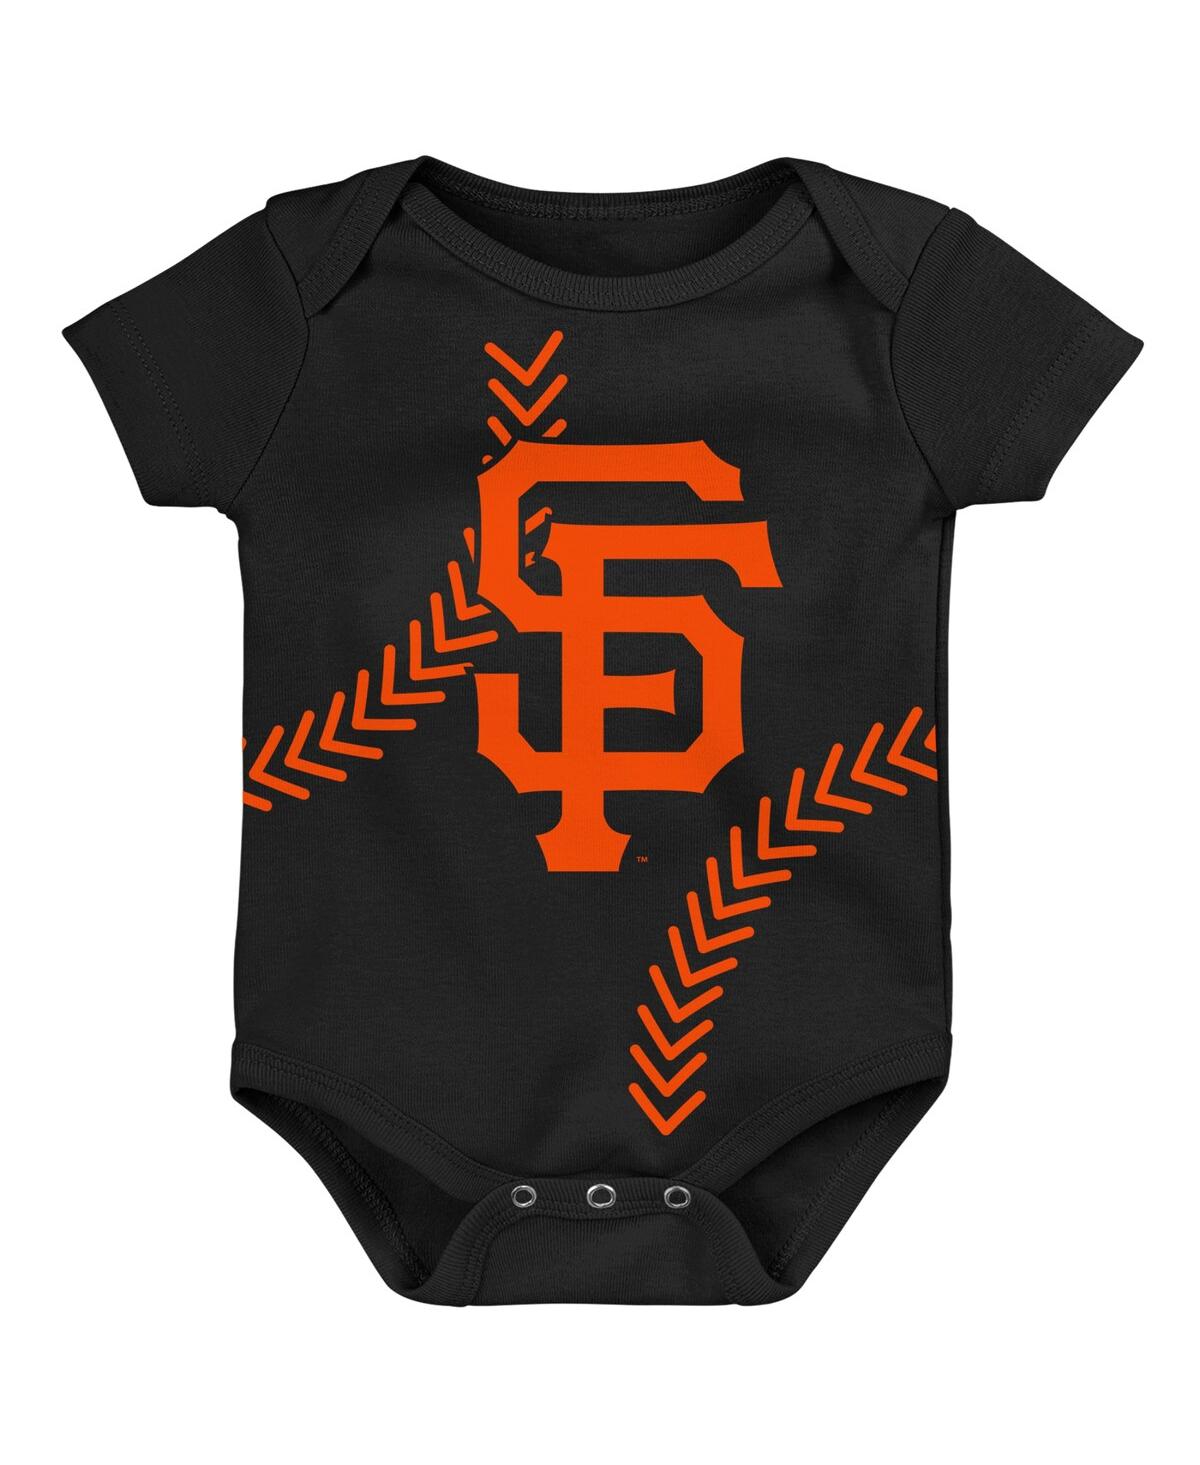 Outerstuff Babies' Newborn And Infant Boys And Girls Black San Francisco Giants Running Home Bodysuit